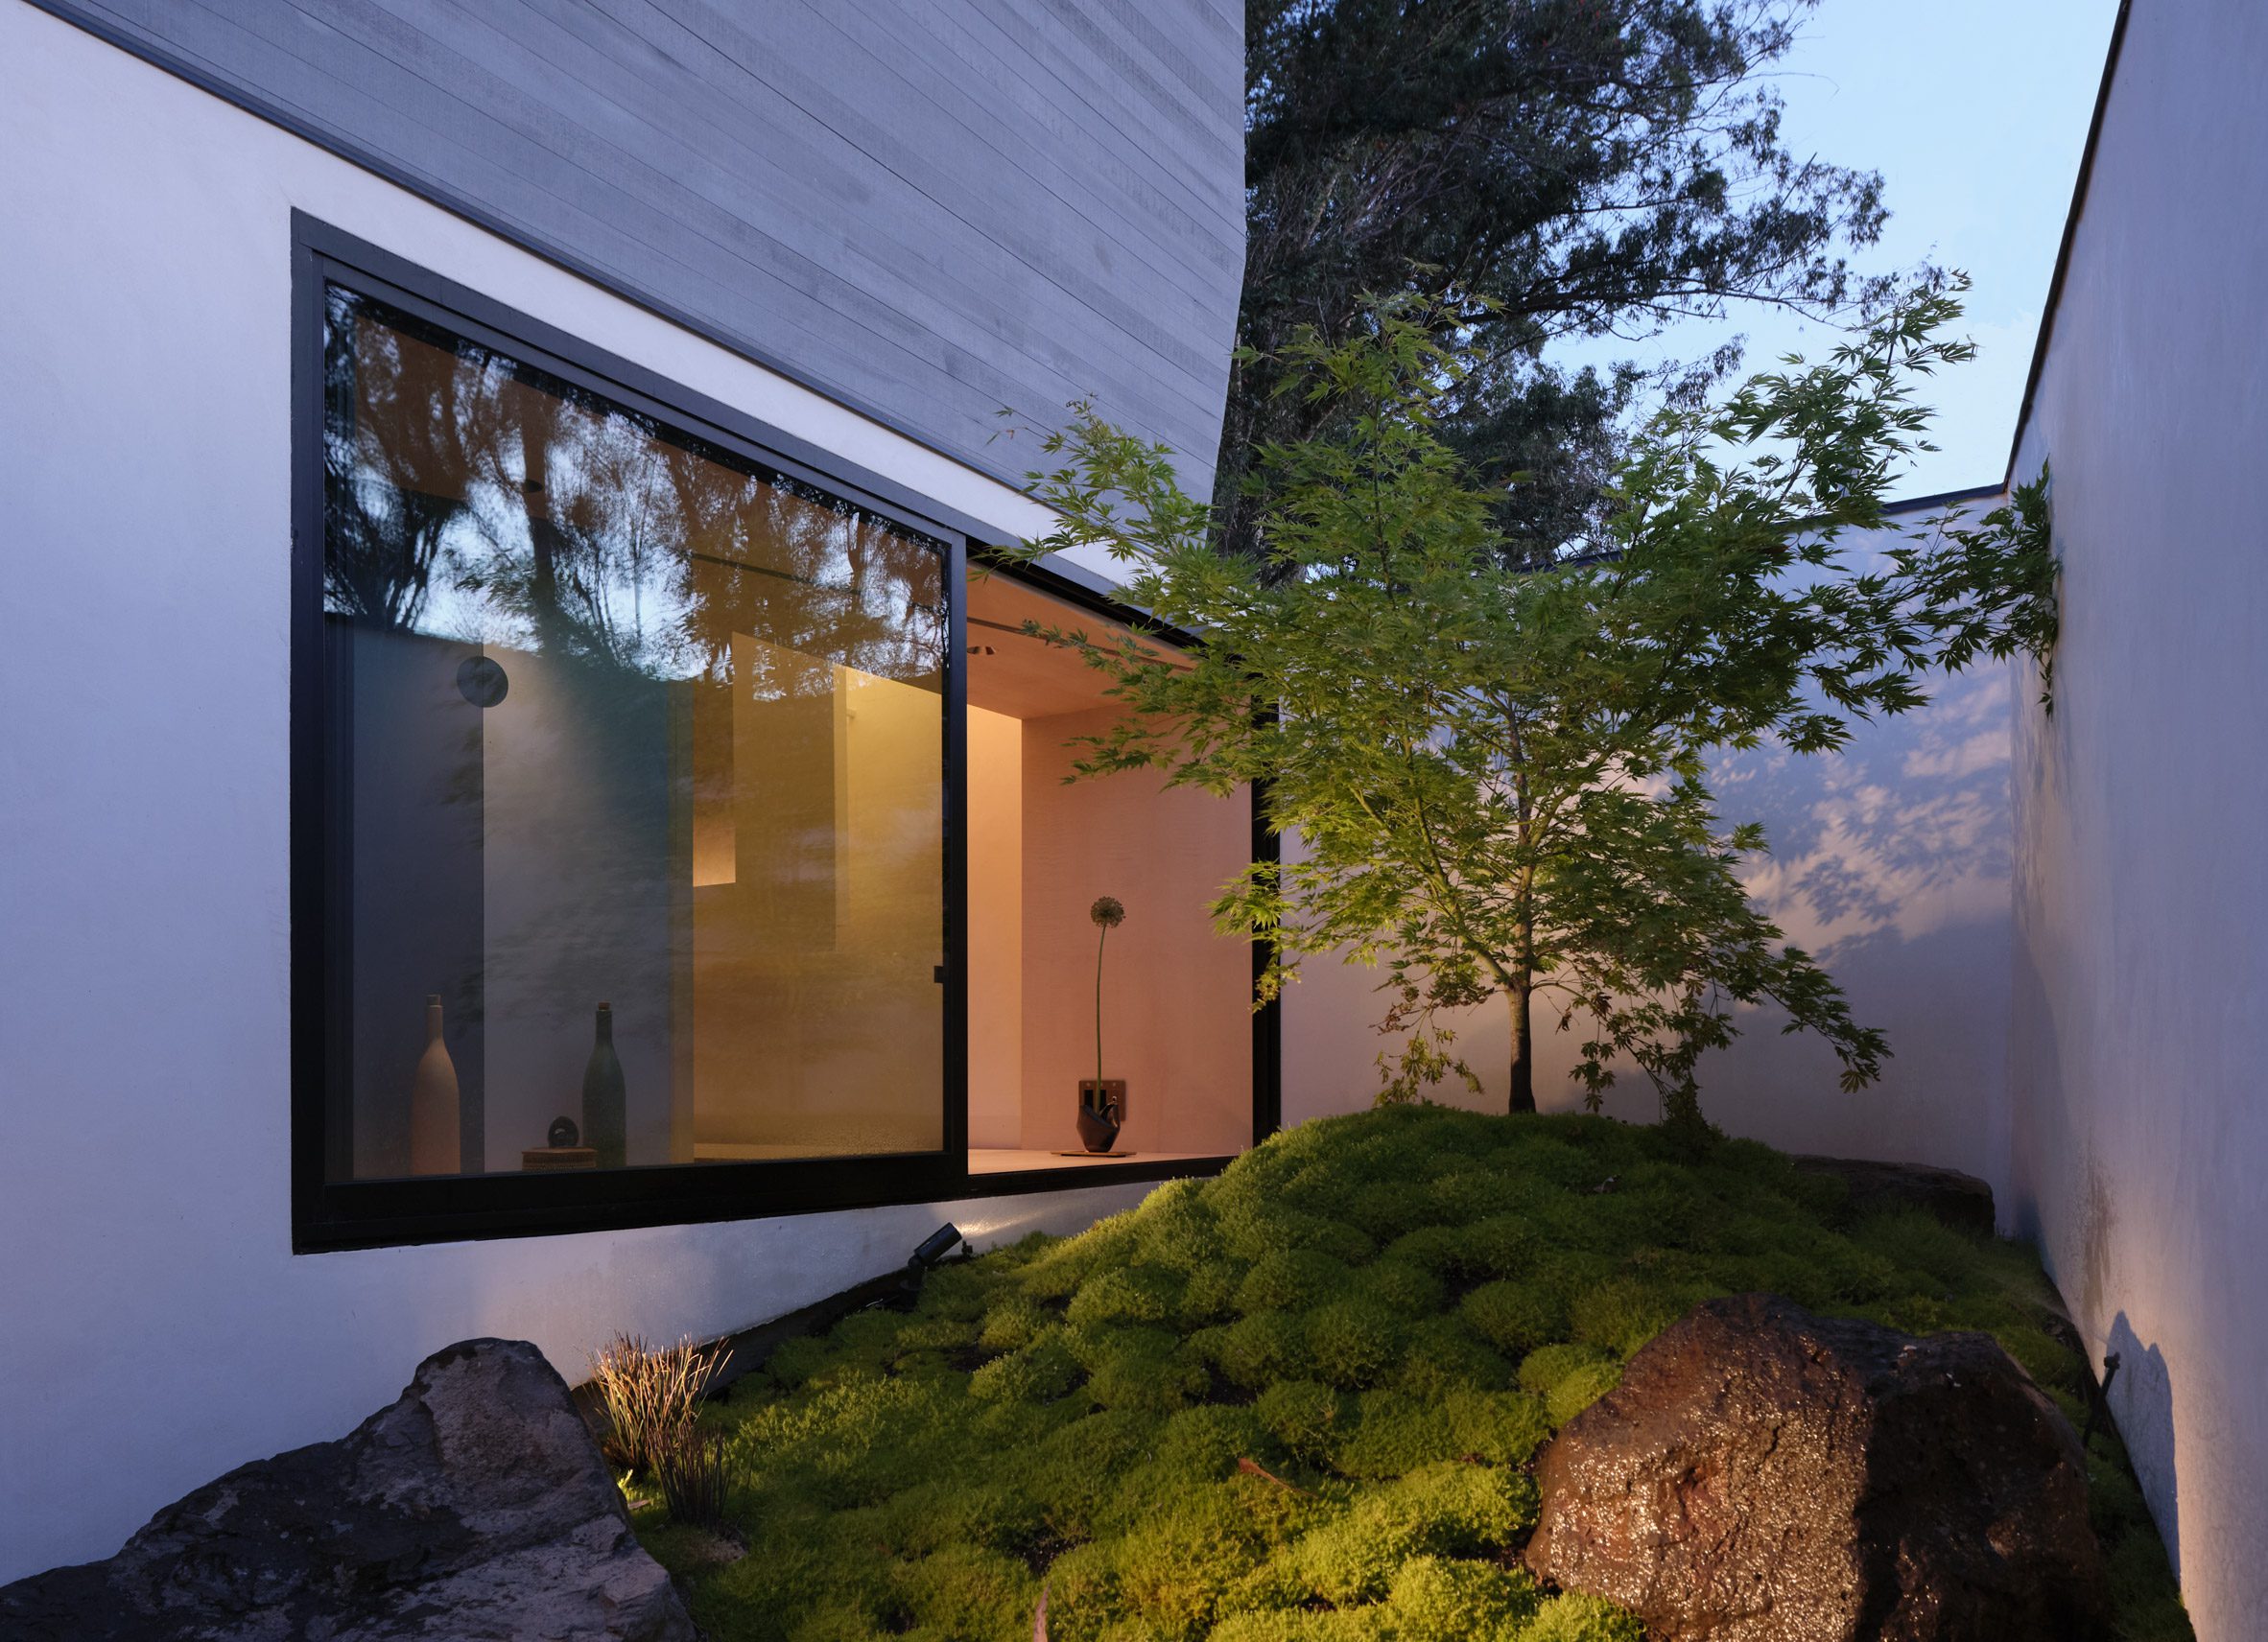 Exterior courtyard with mossy mounds